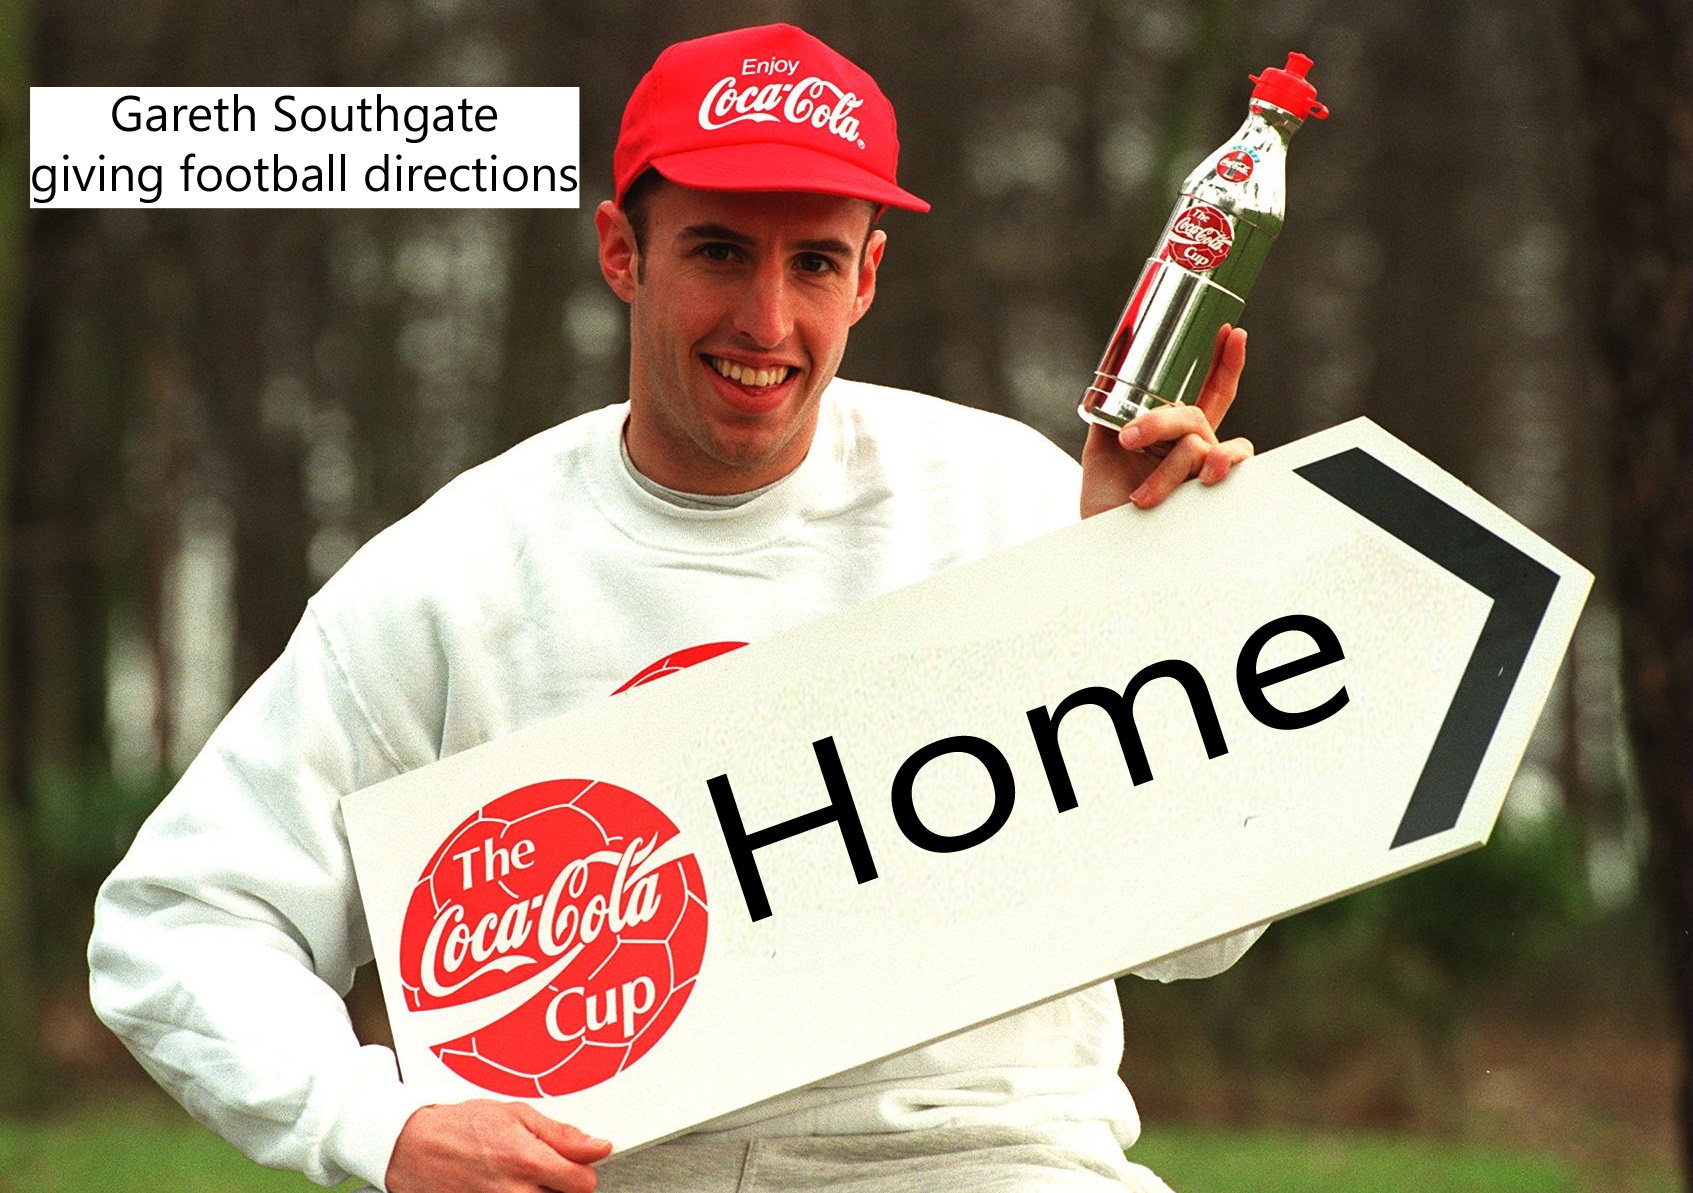 Southgate gives football directions